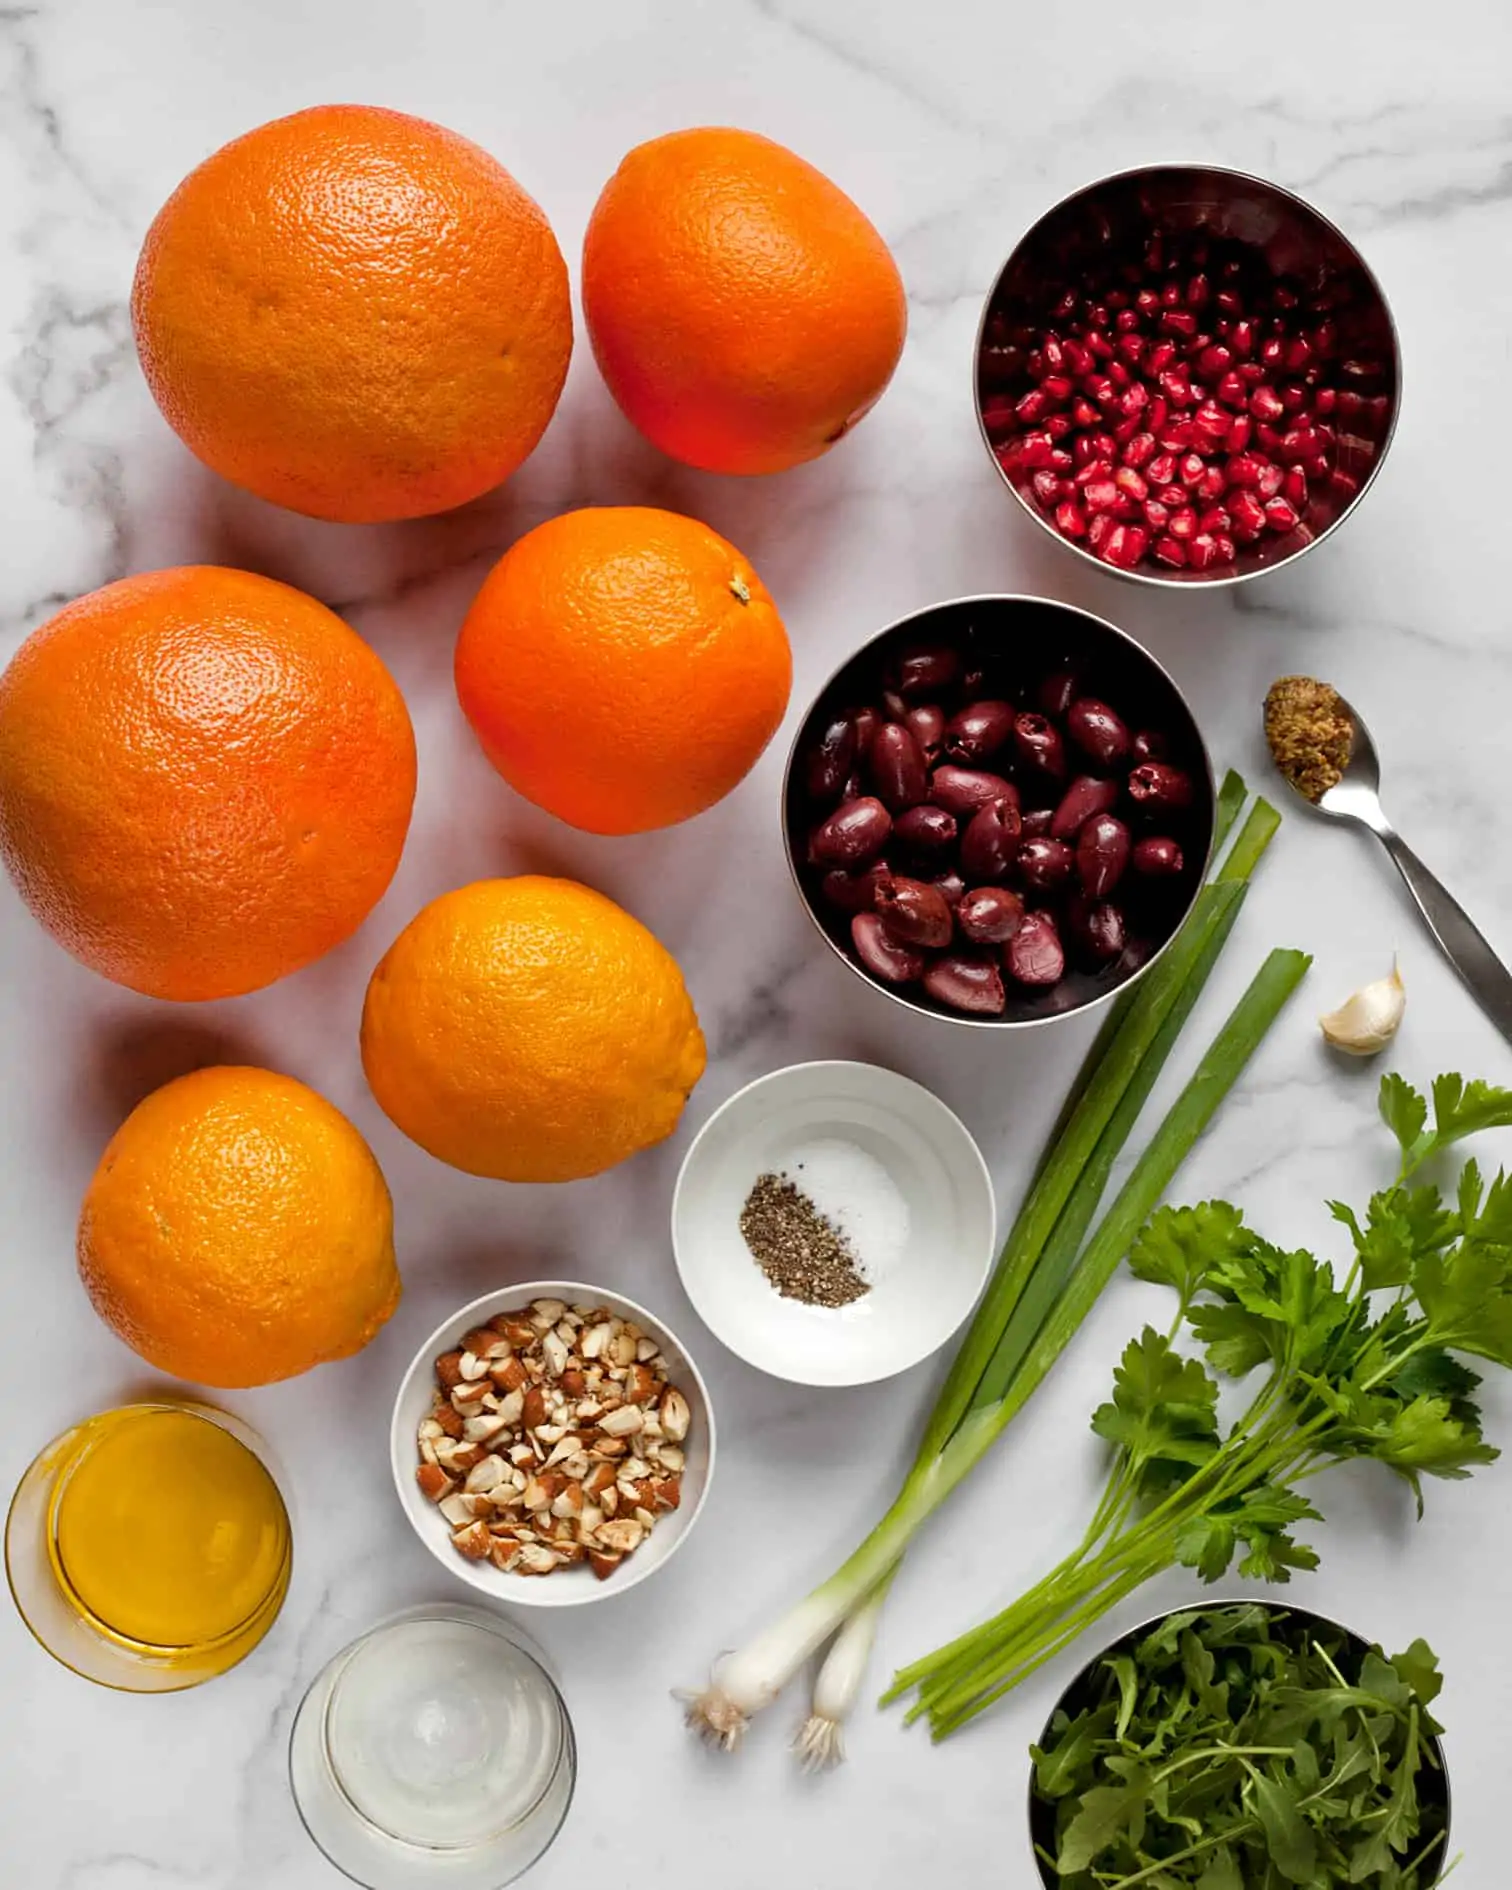 Ingredients including grapefruit, oranges, almonds, olives, pomegranate seeds, and scallions